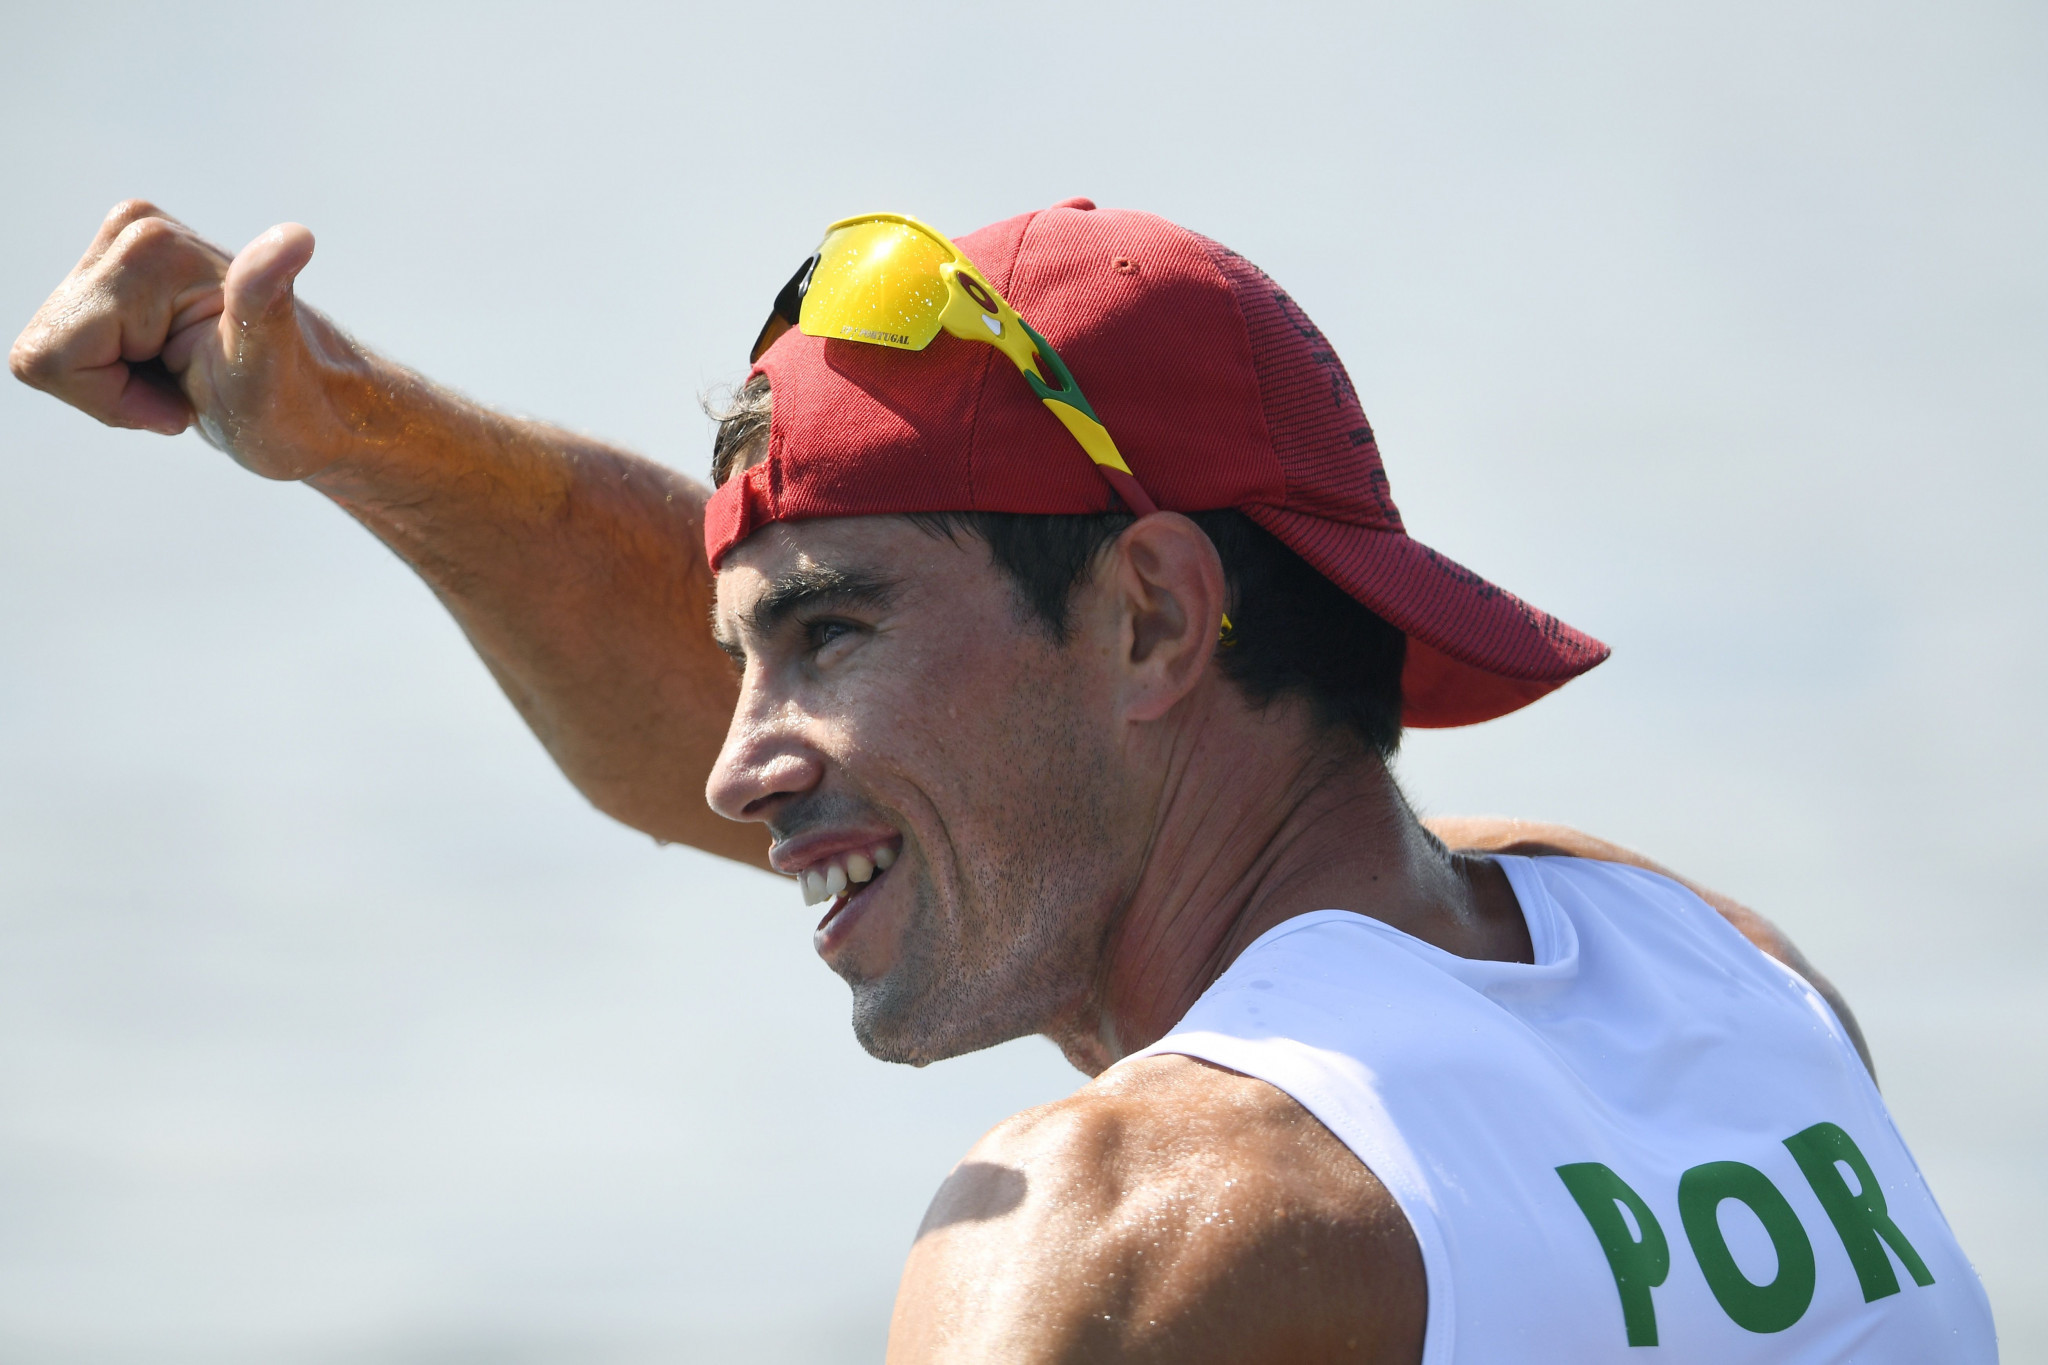 Pimenta dominates in men's K1 500m and 1000m semi-finals at ICF Canoe Sprint World Cup